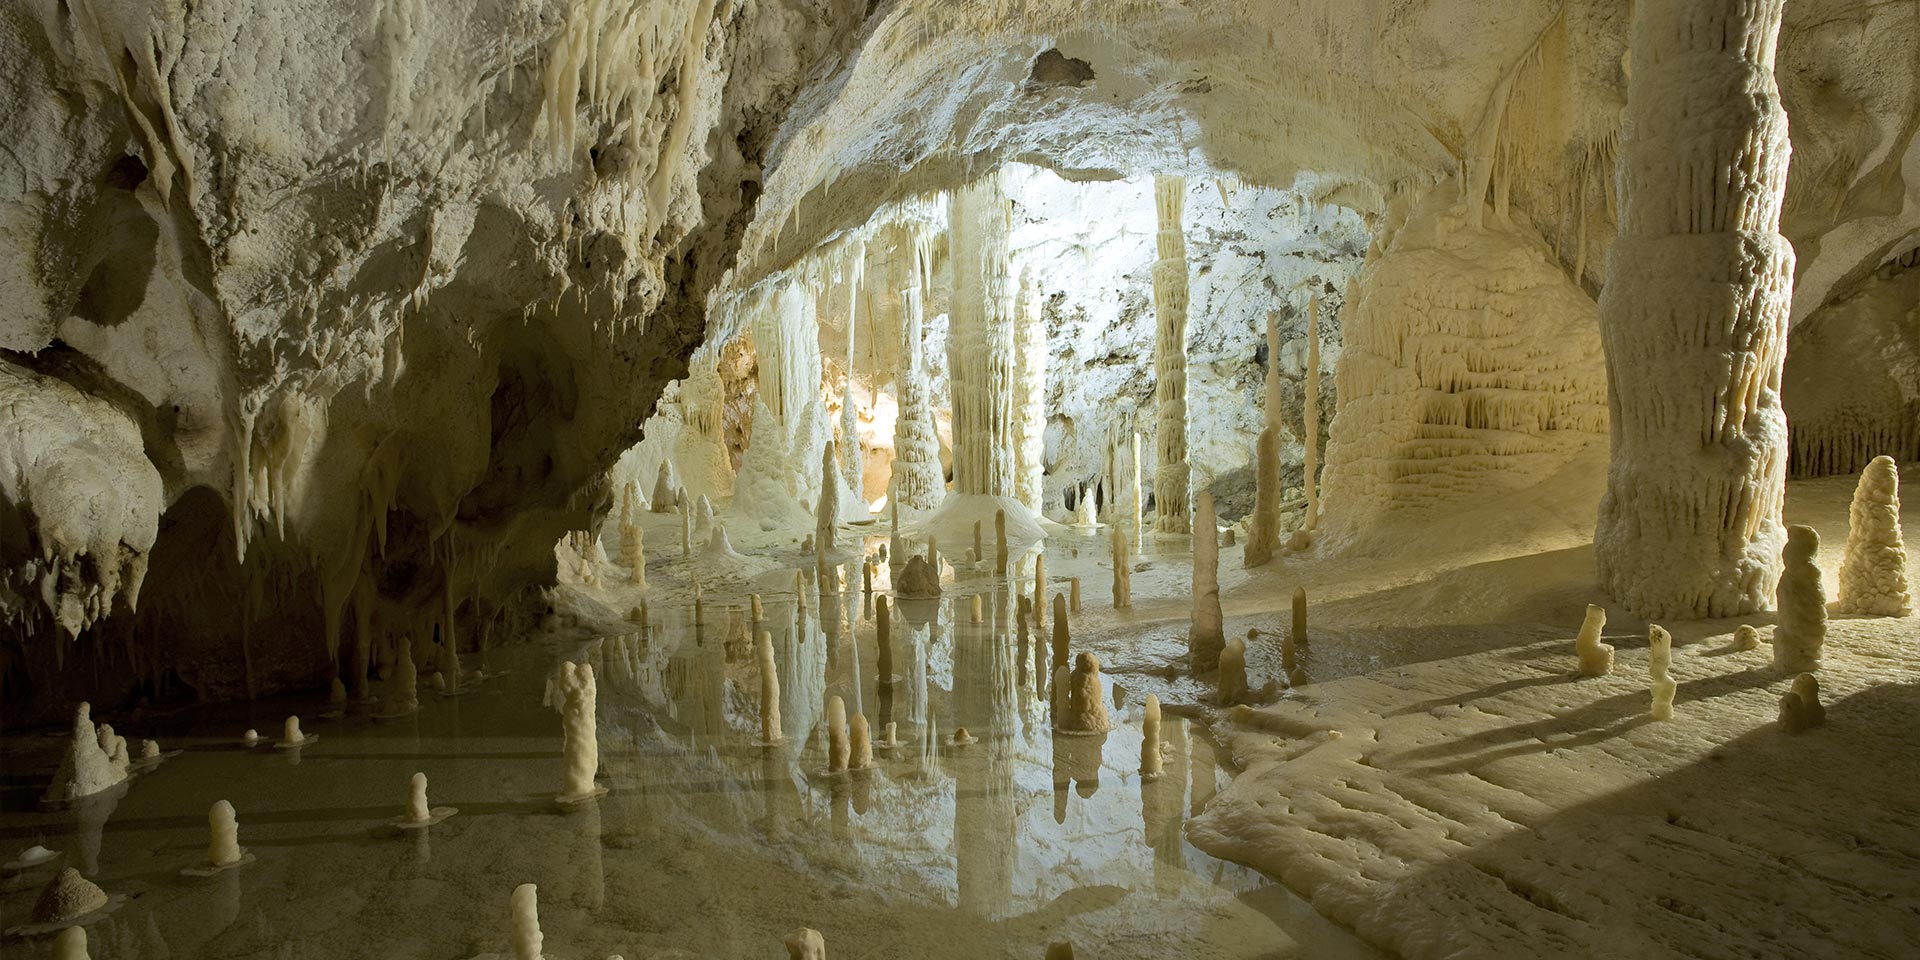 The Frasassi Caves